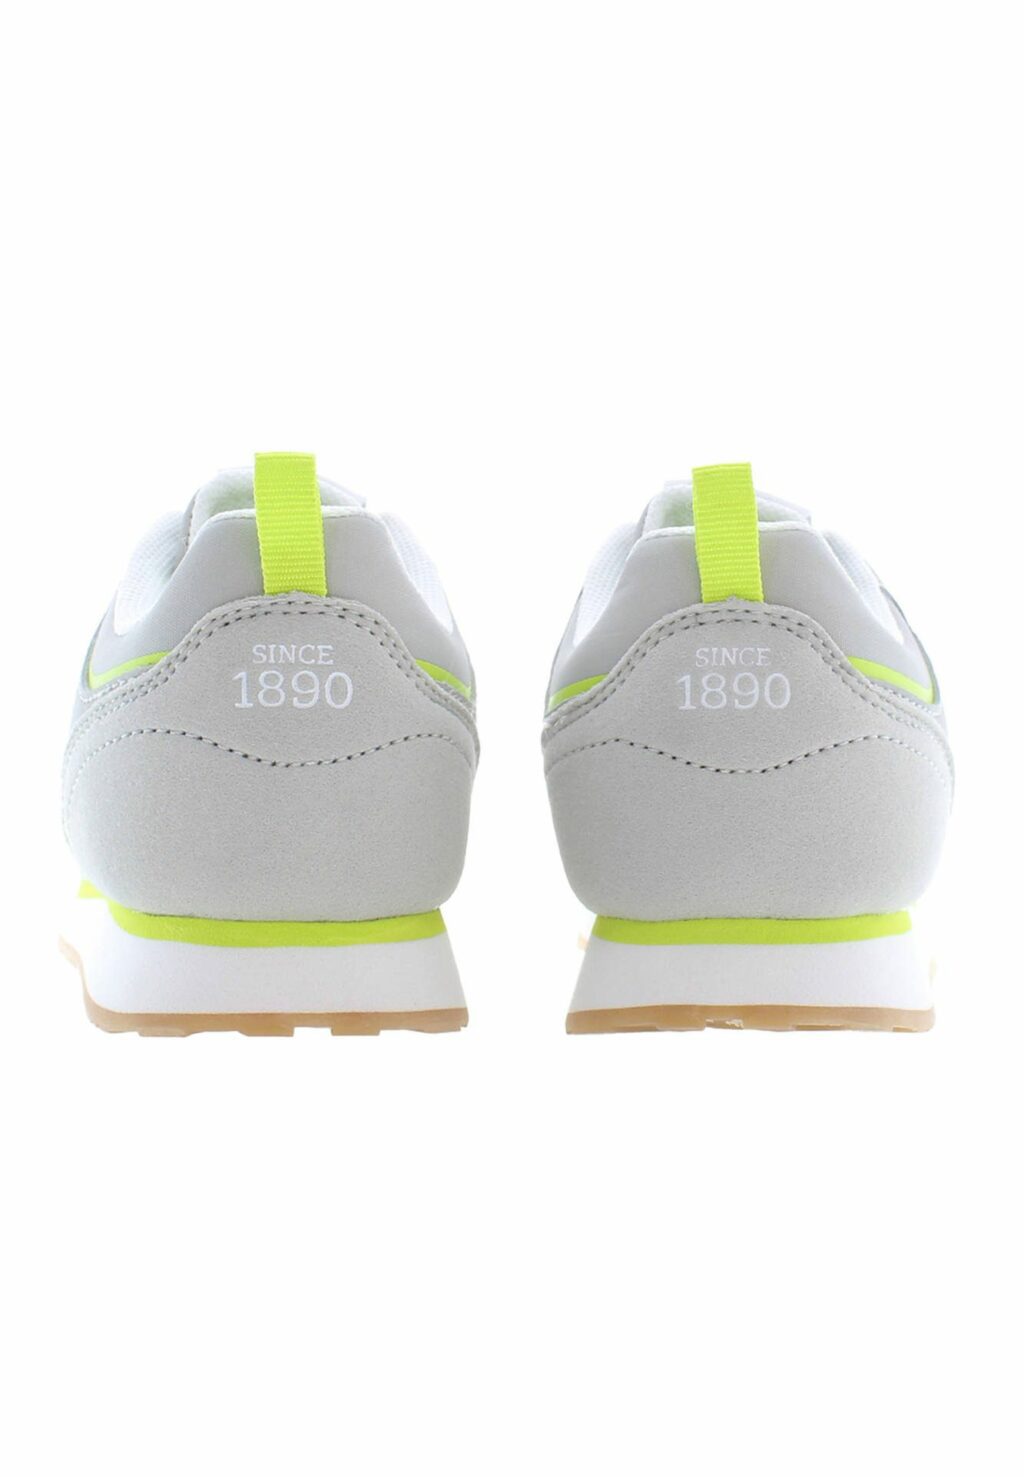 US POLO BEST PRICE SPORTS SHOES FOR KIDS NOBIK010K3NH1_GRIGIO_LGR-LGE02